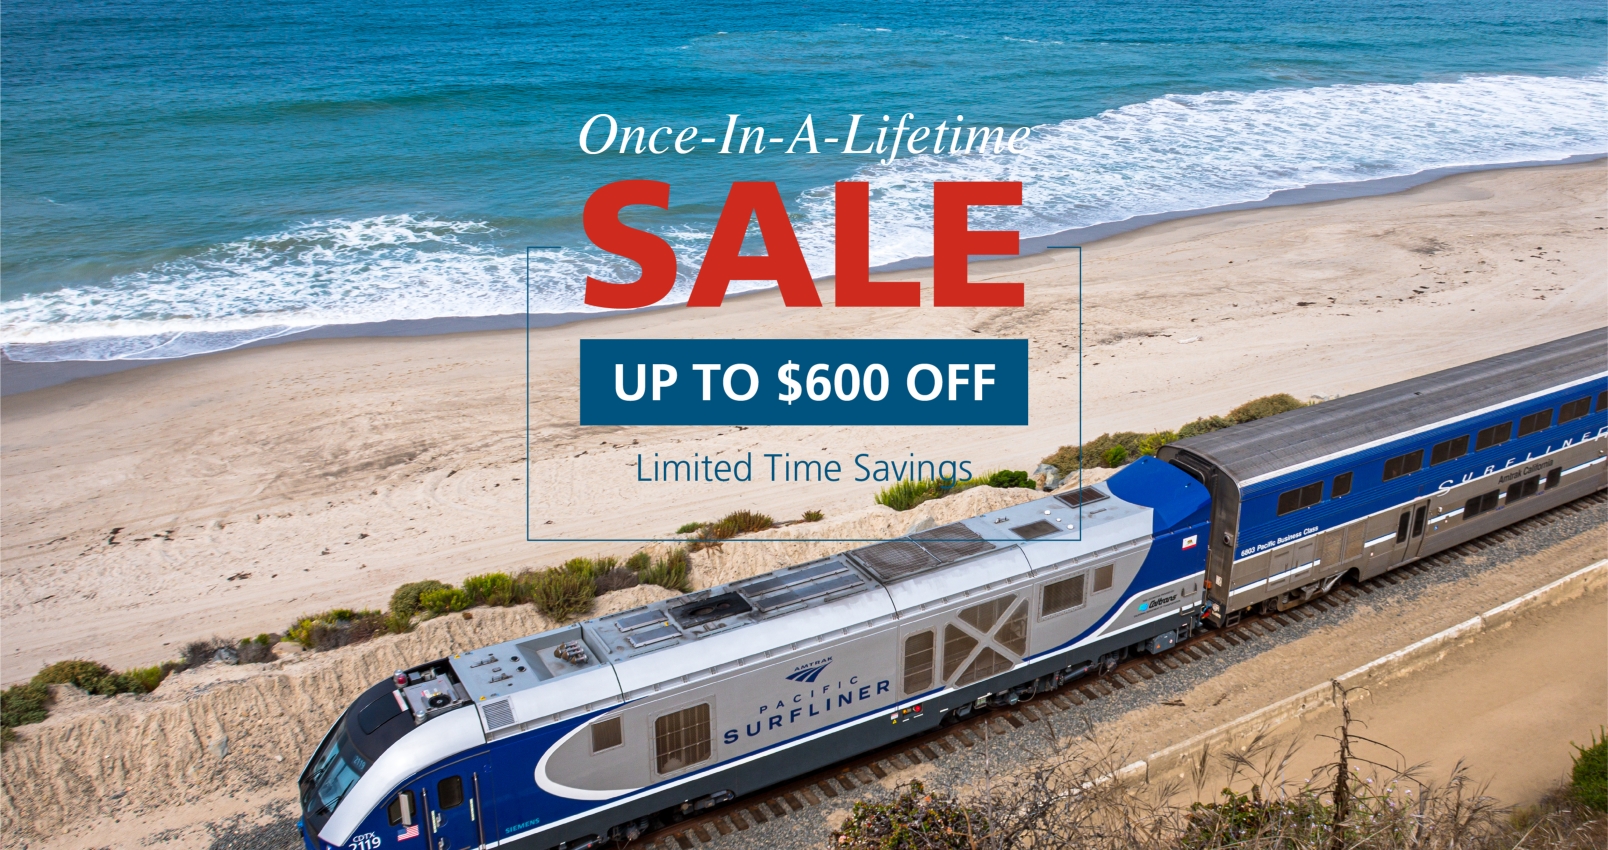 Amtrak Vacations®  Train Tours & Vacation Packages